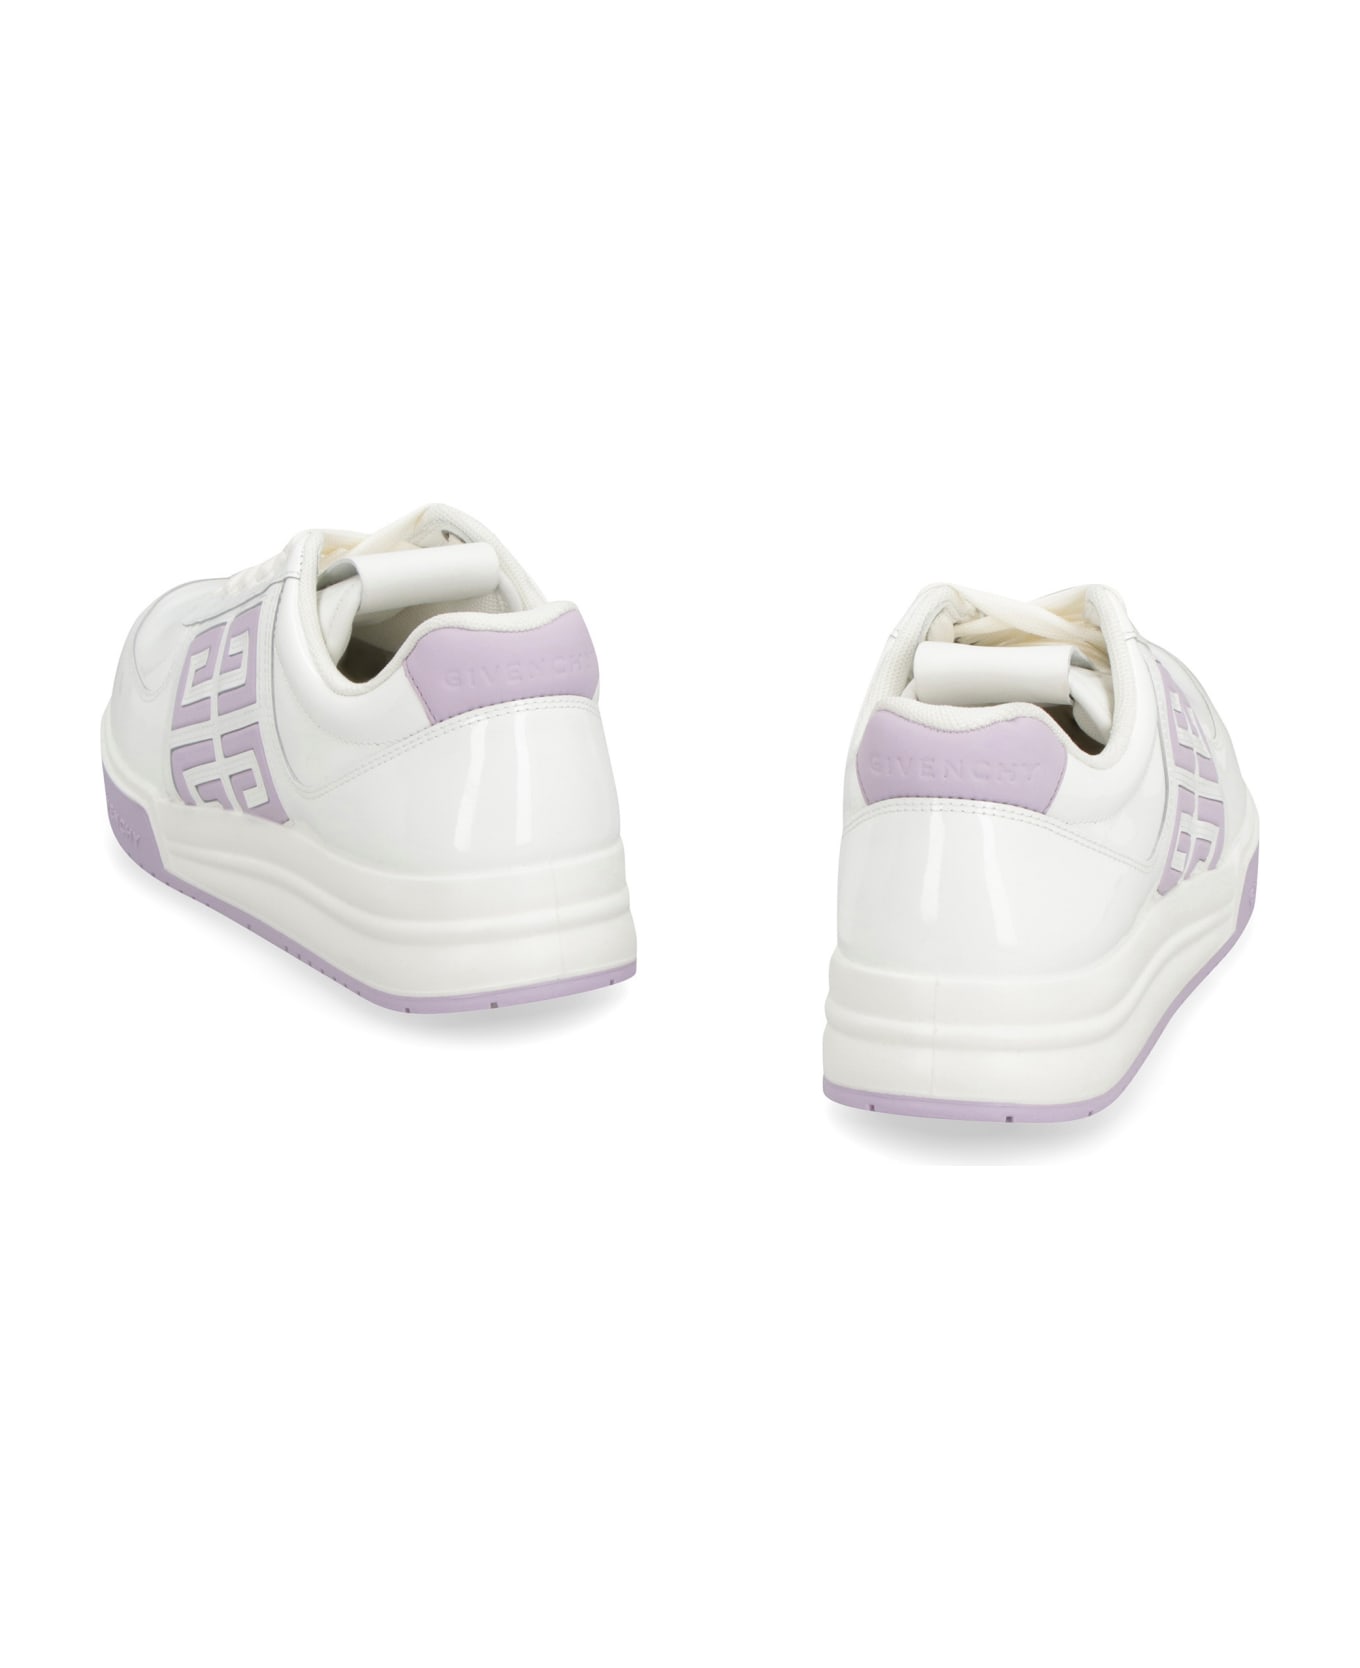 Givenchy G4 Leather Sneakers - White スニーカー